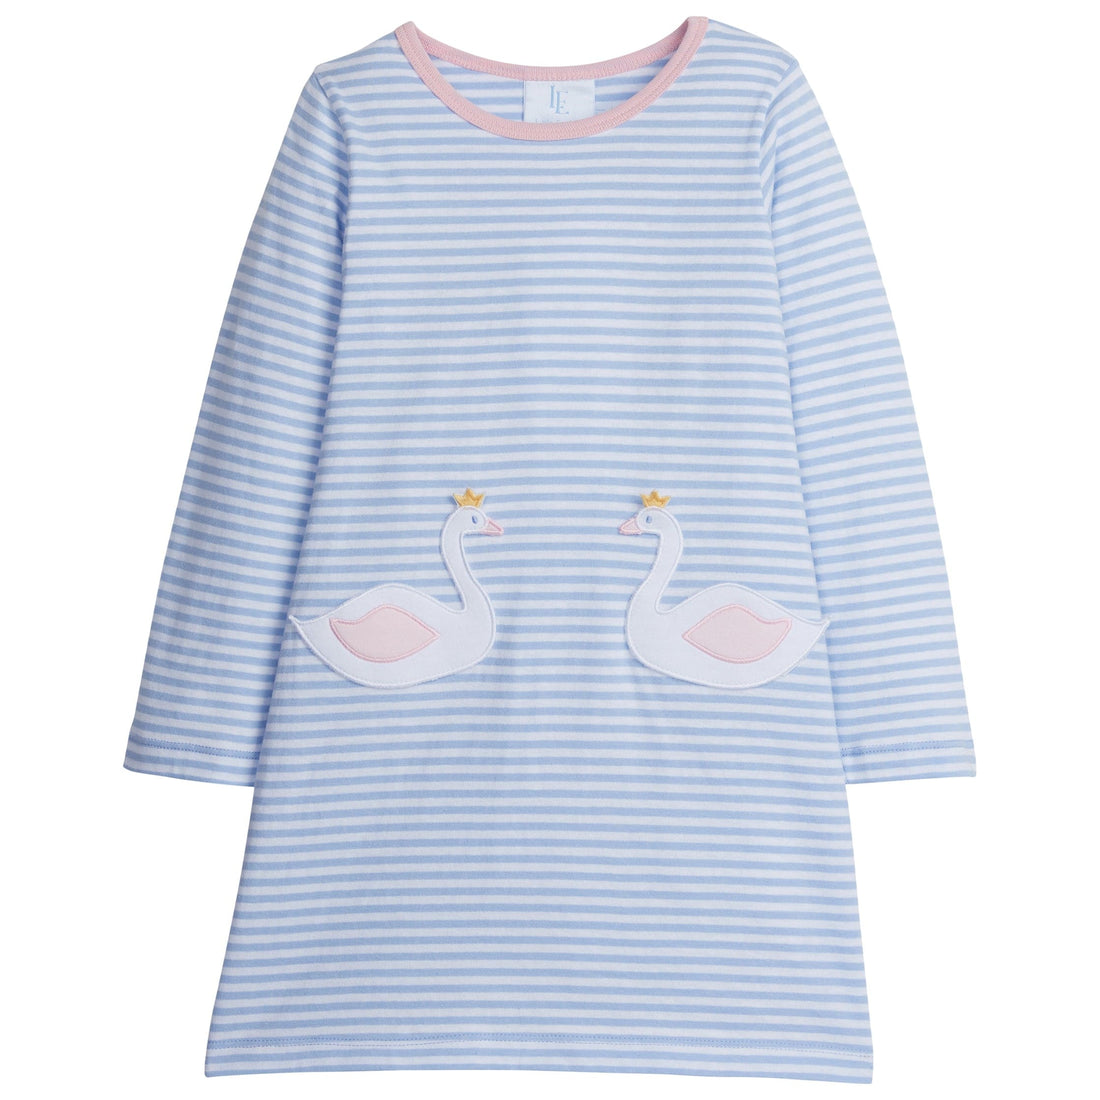 little english classic childrens clothing girls light blue and white striped dress with applique swan pockets 